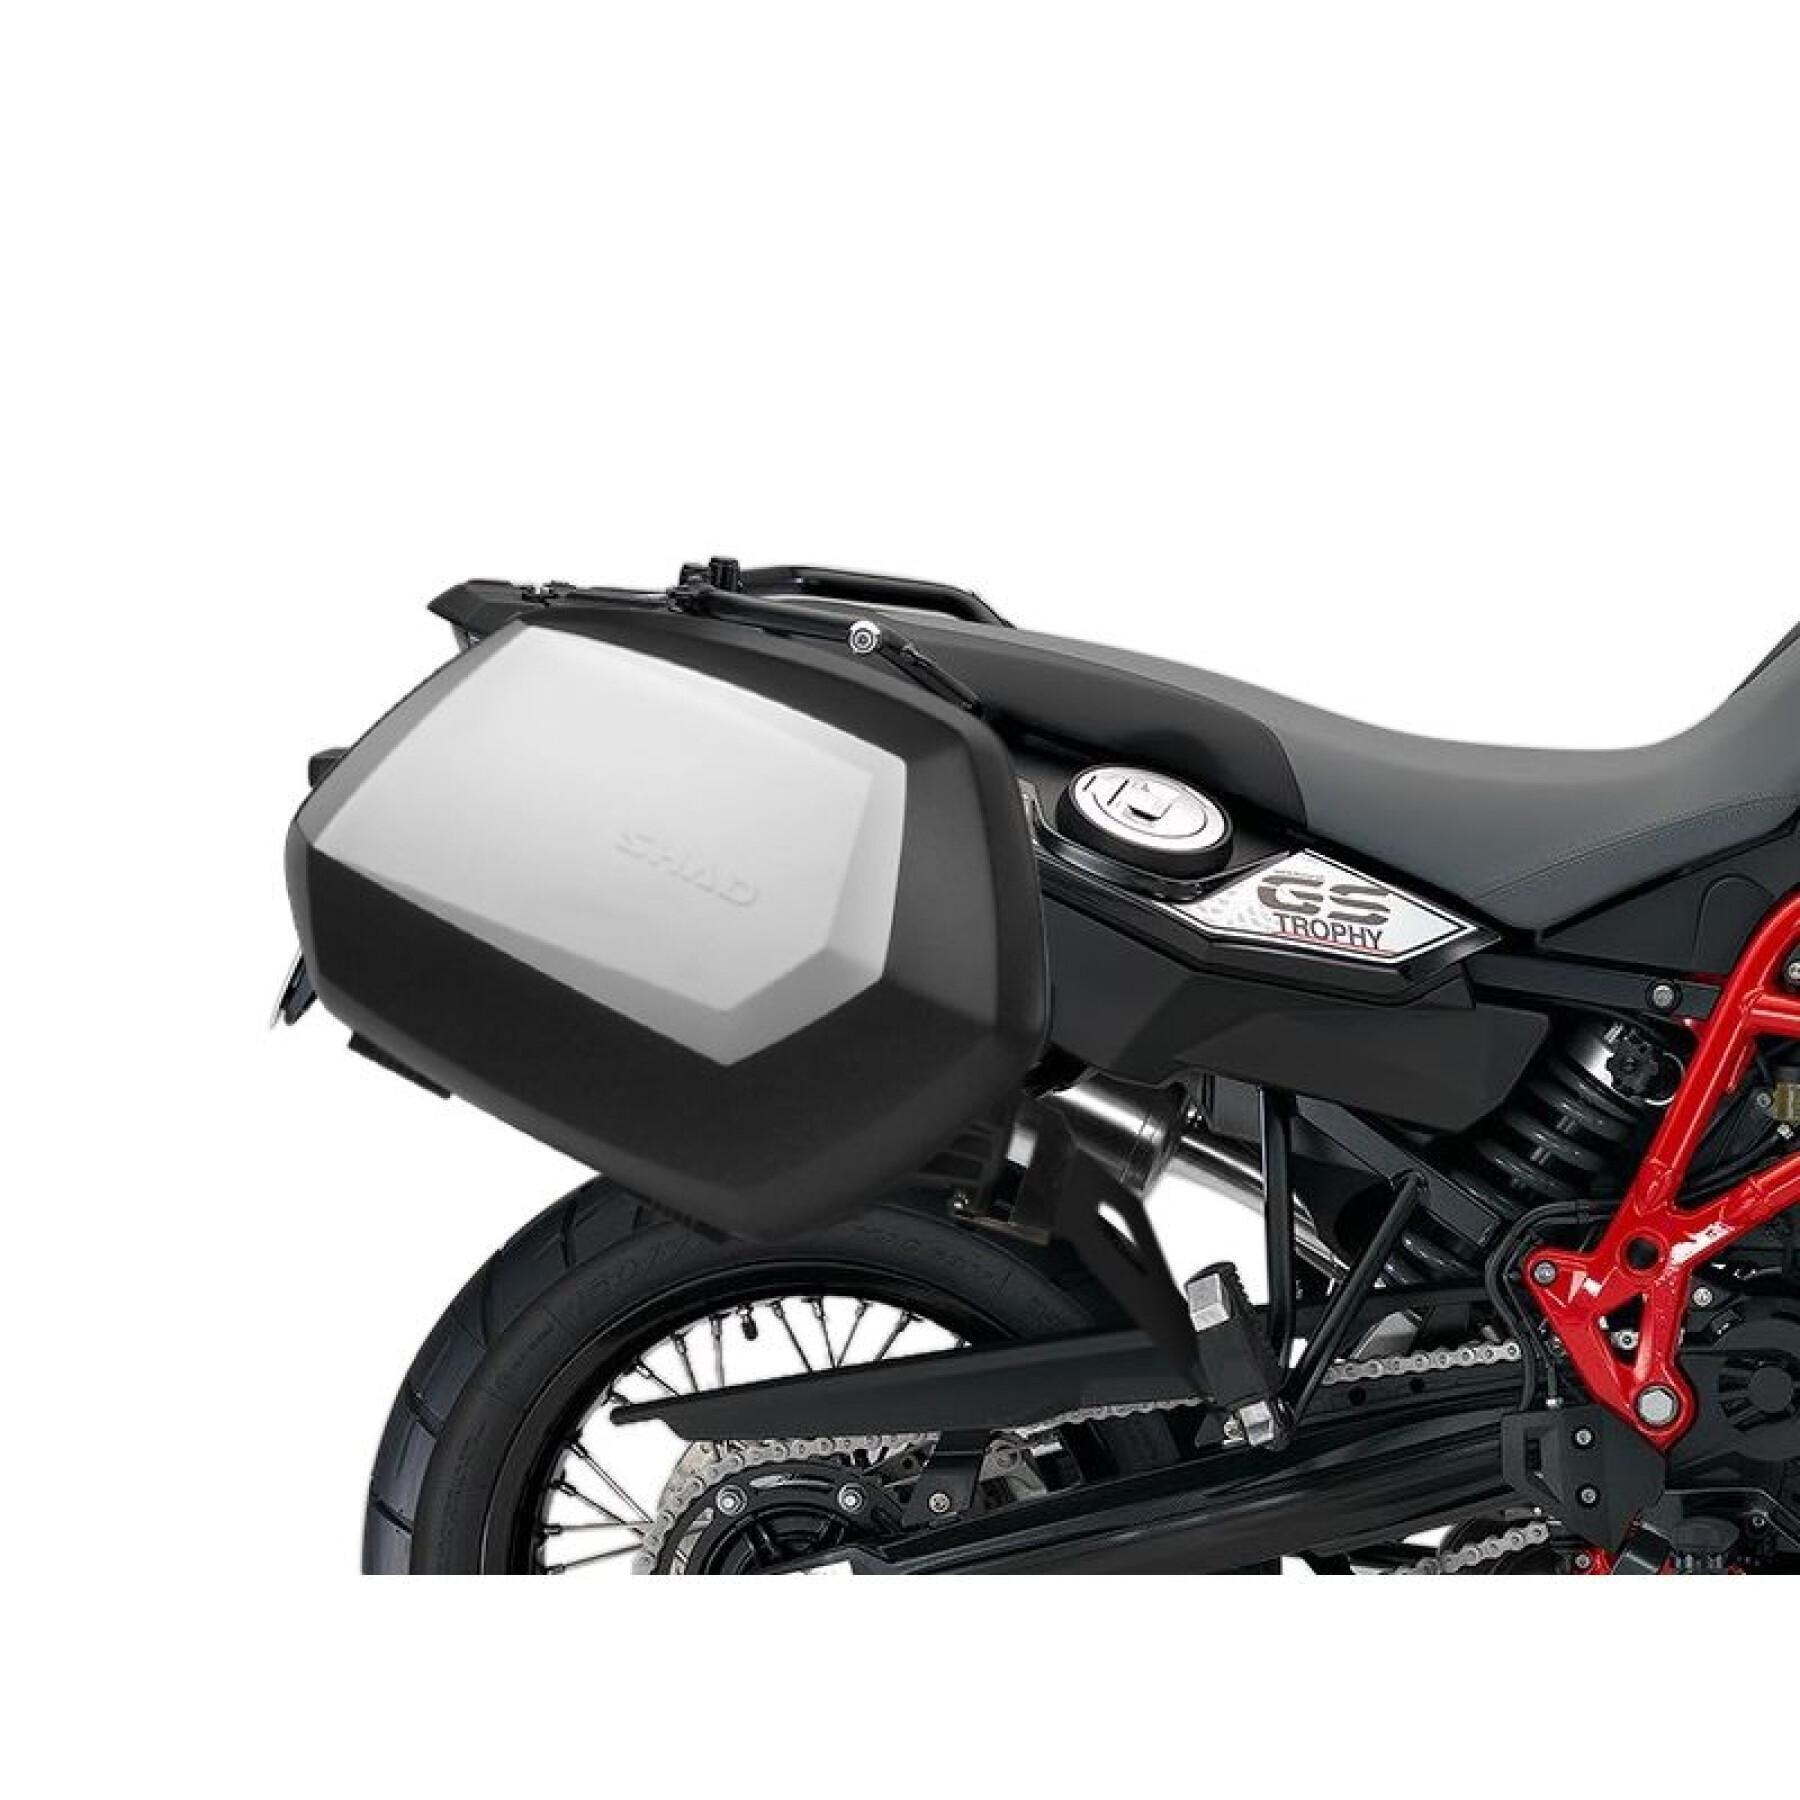 Support valises latérales moto Shad 4P System Moto Guzzi V85Tt 2019-2020 -  Supports - Valises latérales - Bagagerie